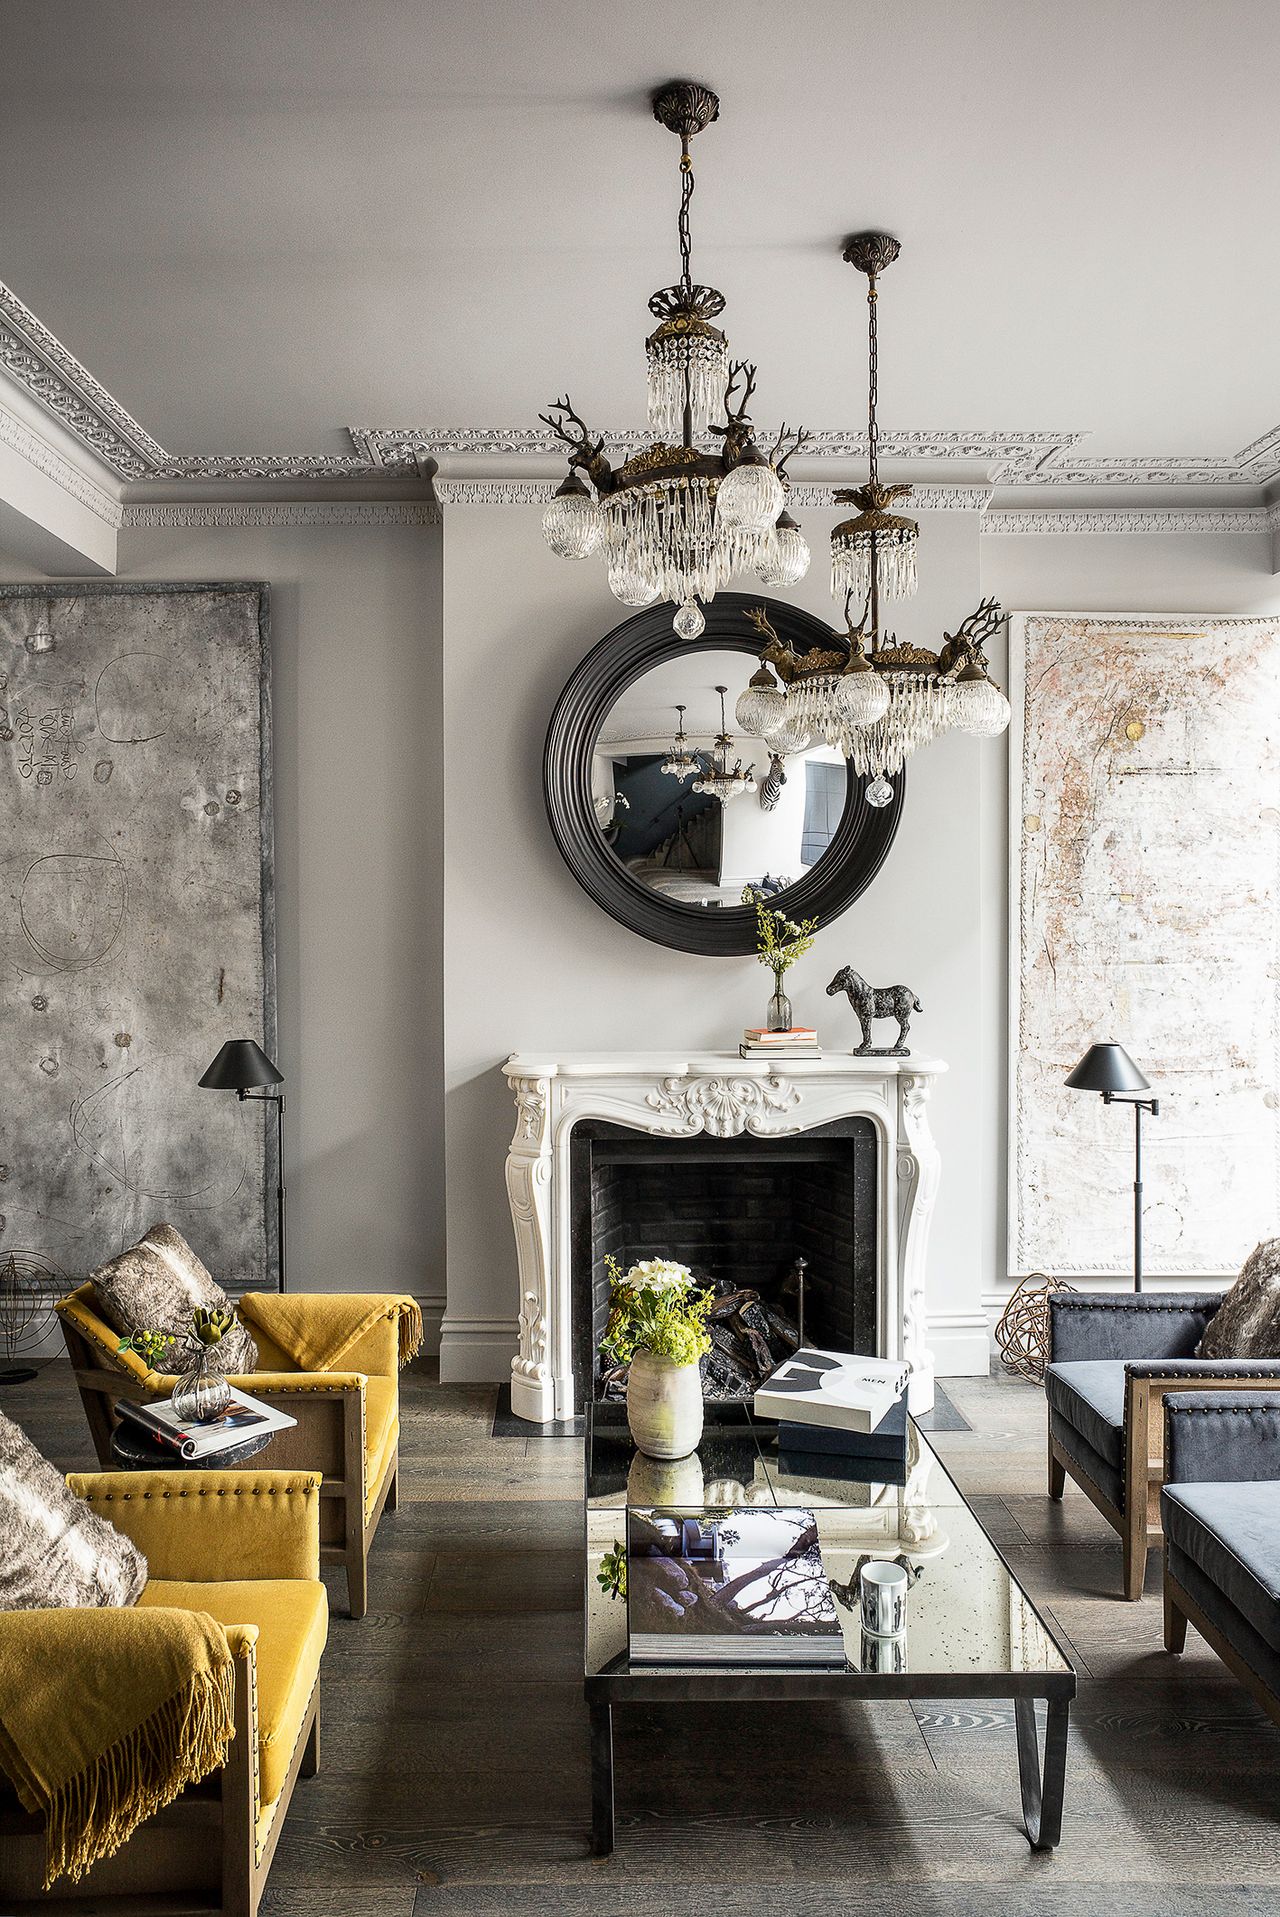 10 grey and yellow living room ideas – how to get this classic combo